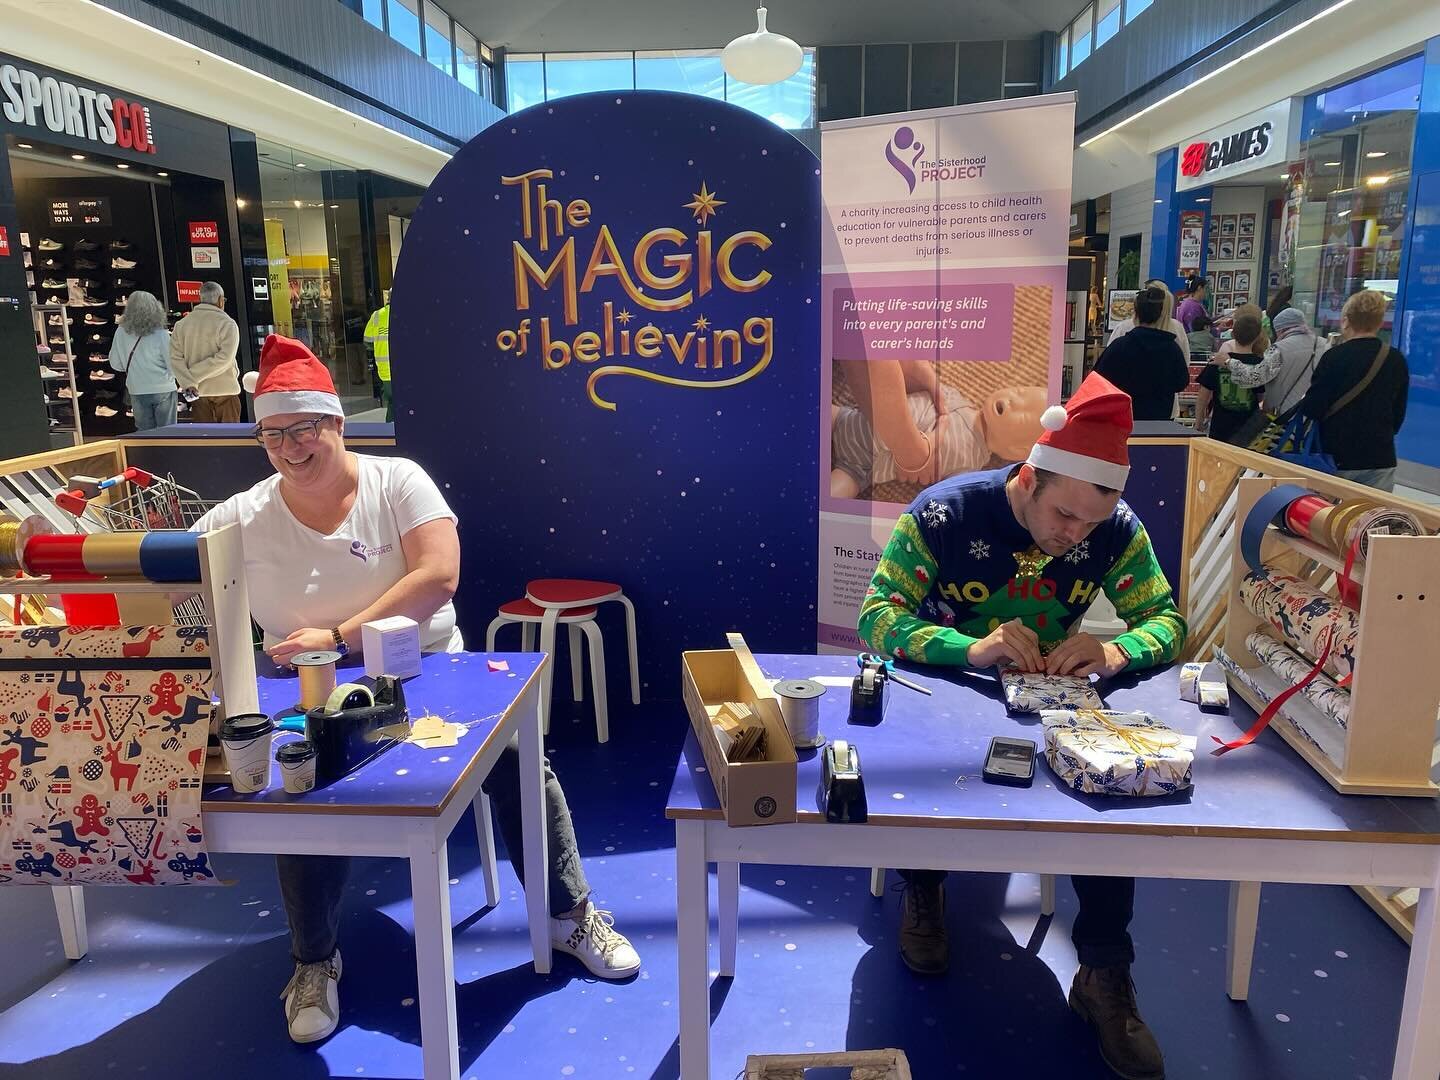 And that&rsquo;s a wrap!
Thank you to our volunteer wrapping elf&rsquo;s and to anyone that came past and got their gifts wrapped. Many generous people today who rounded up or just gave us a donation because they believed in our cause!

Wishing every